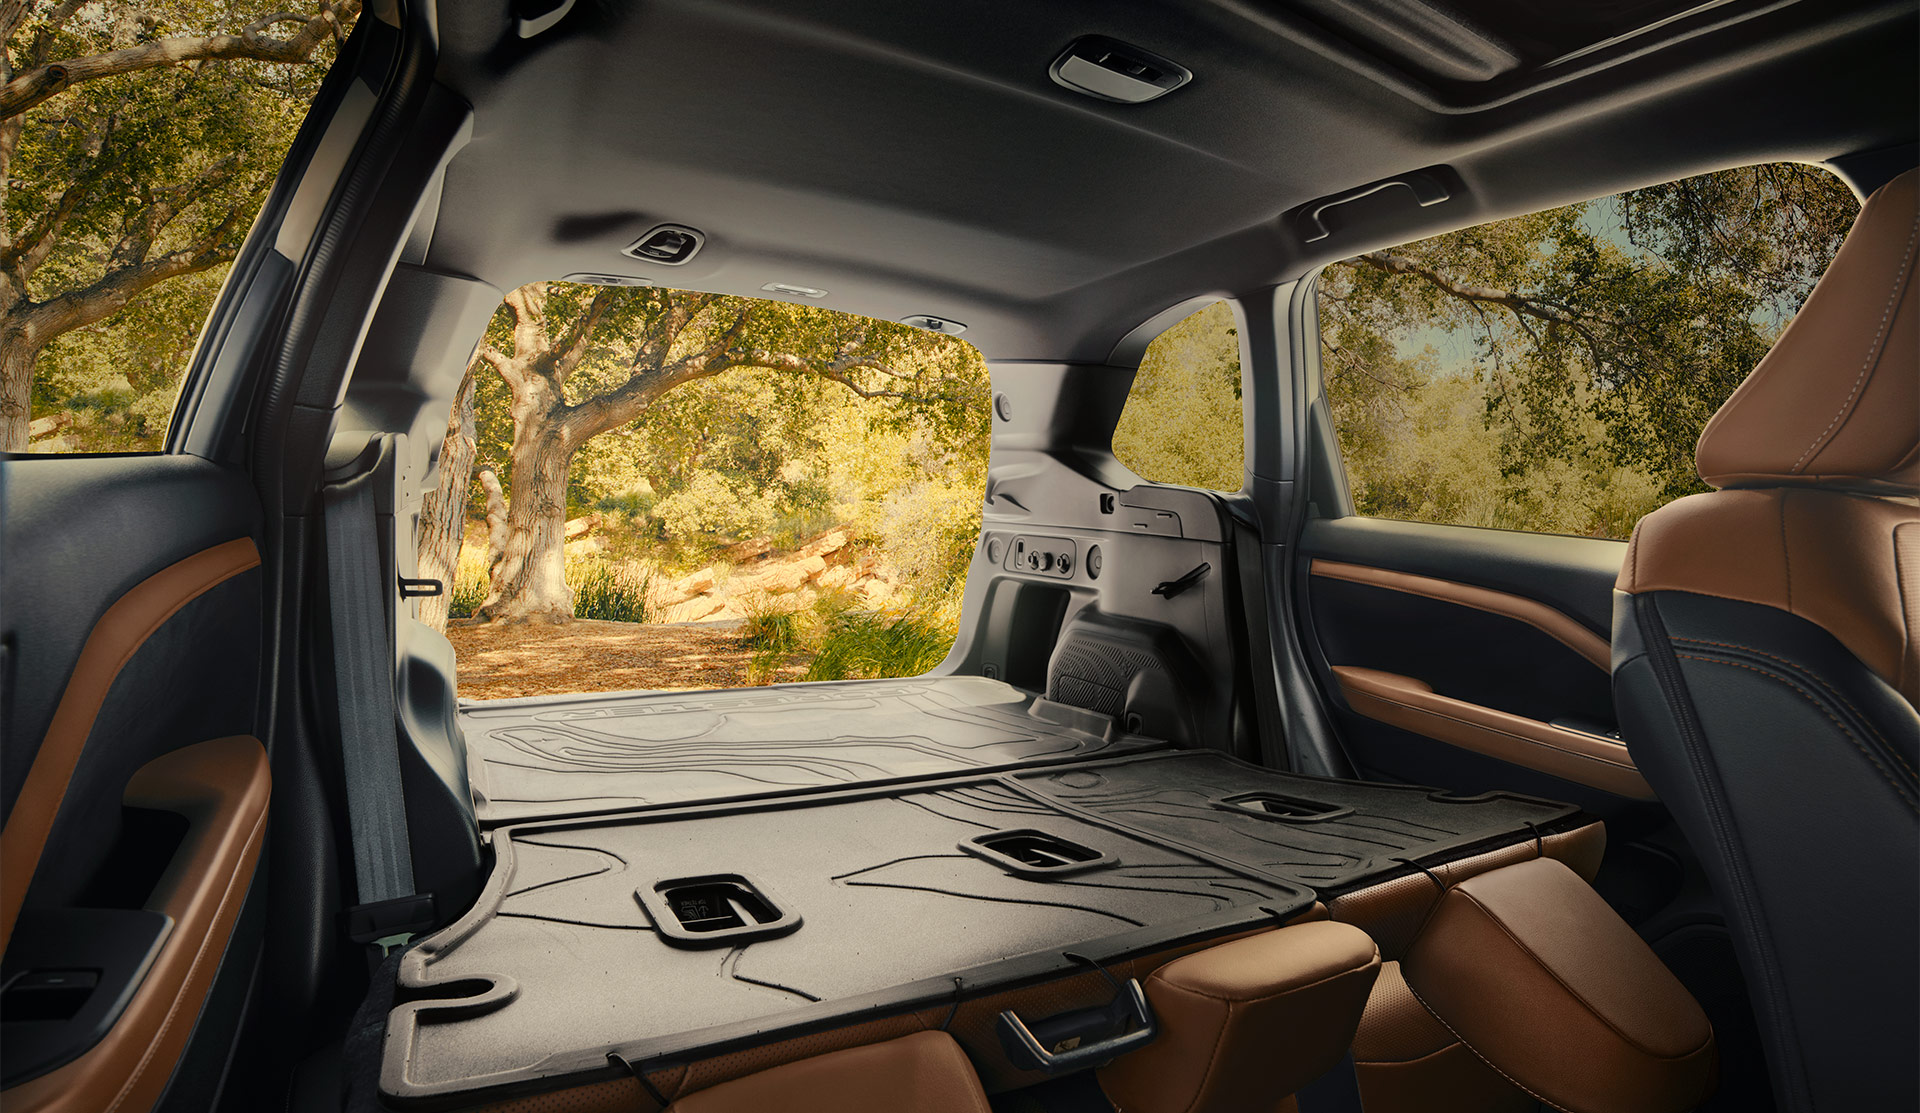 2025 Subaru Forester interior showing cargo space with rear seats folded down.